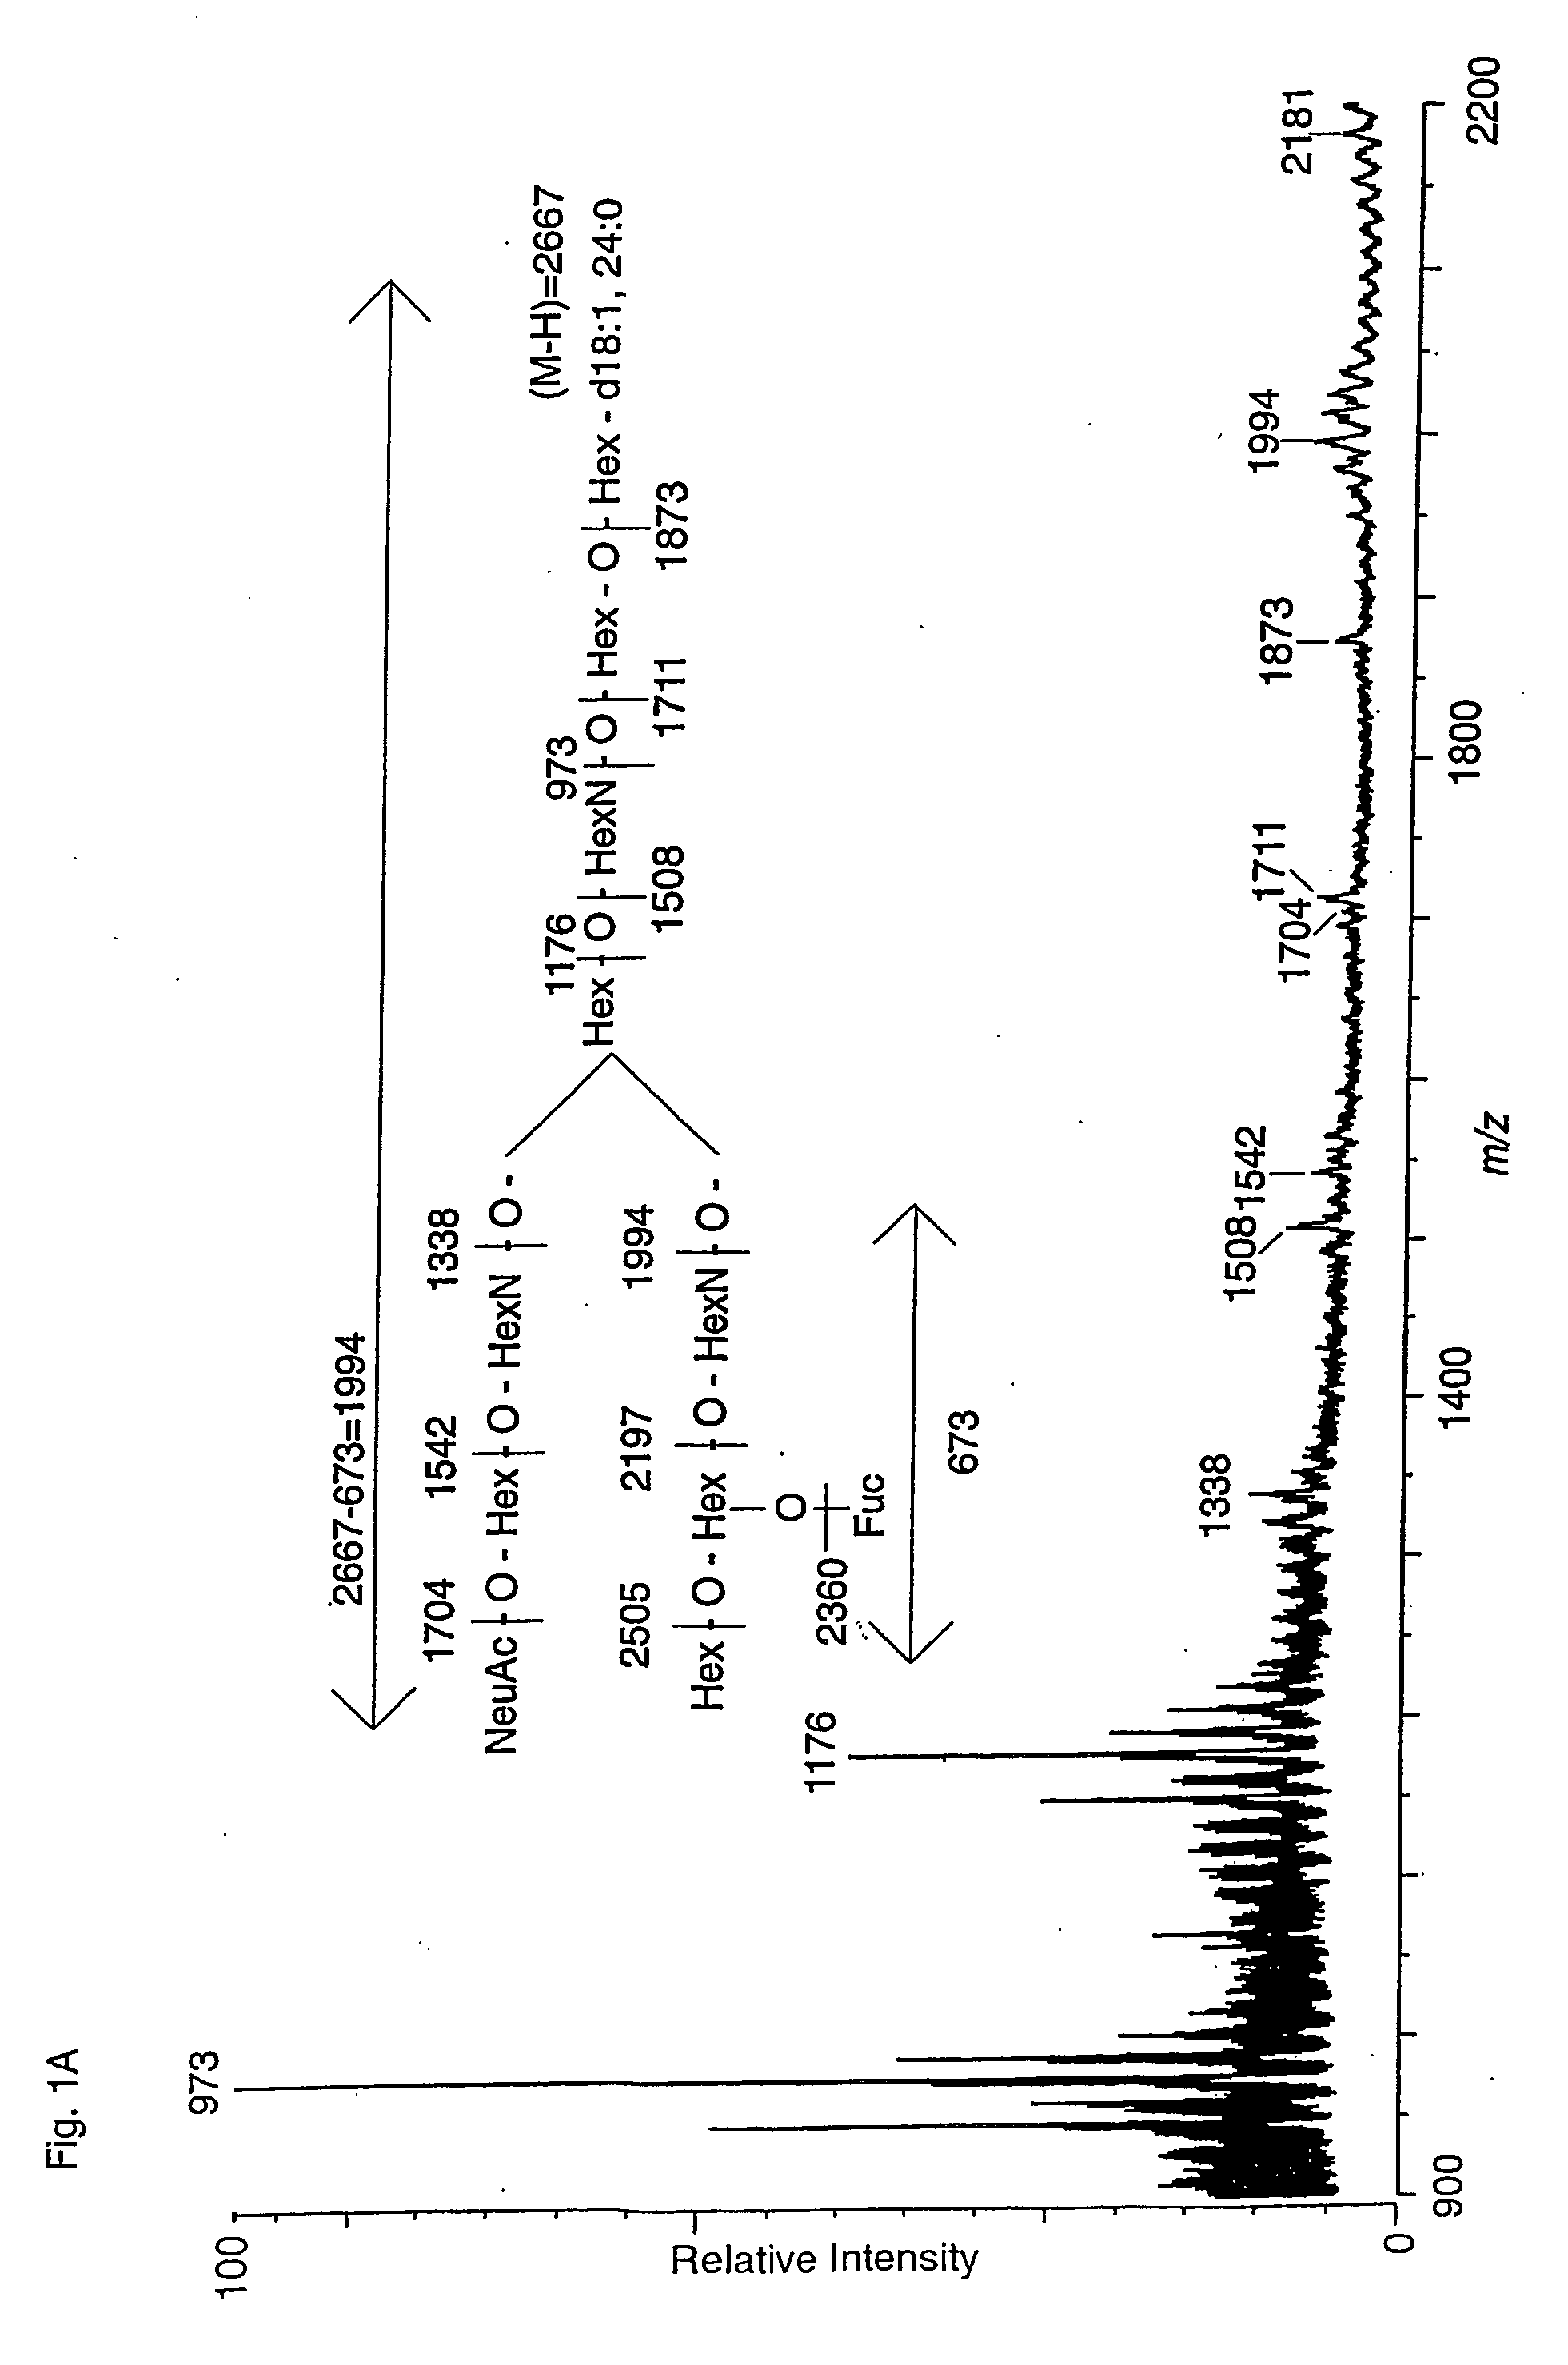 High affinity receptors for helicobacter pylori and use thereof